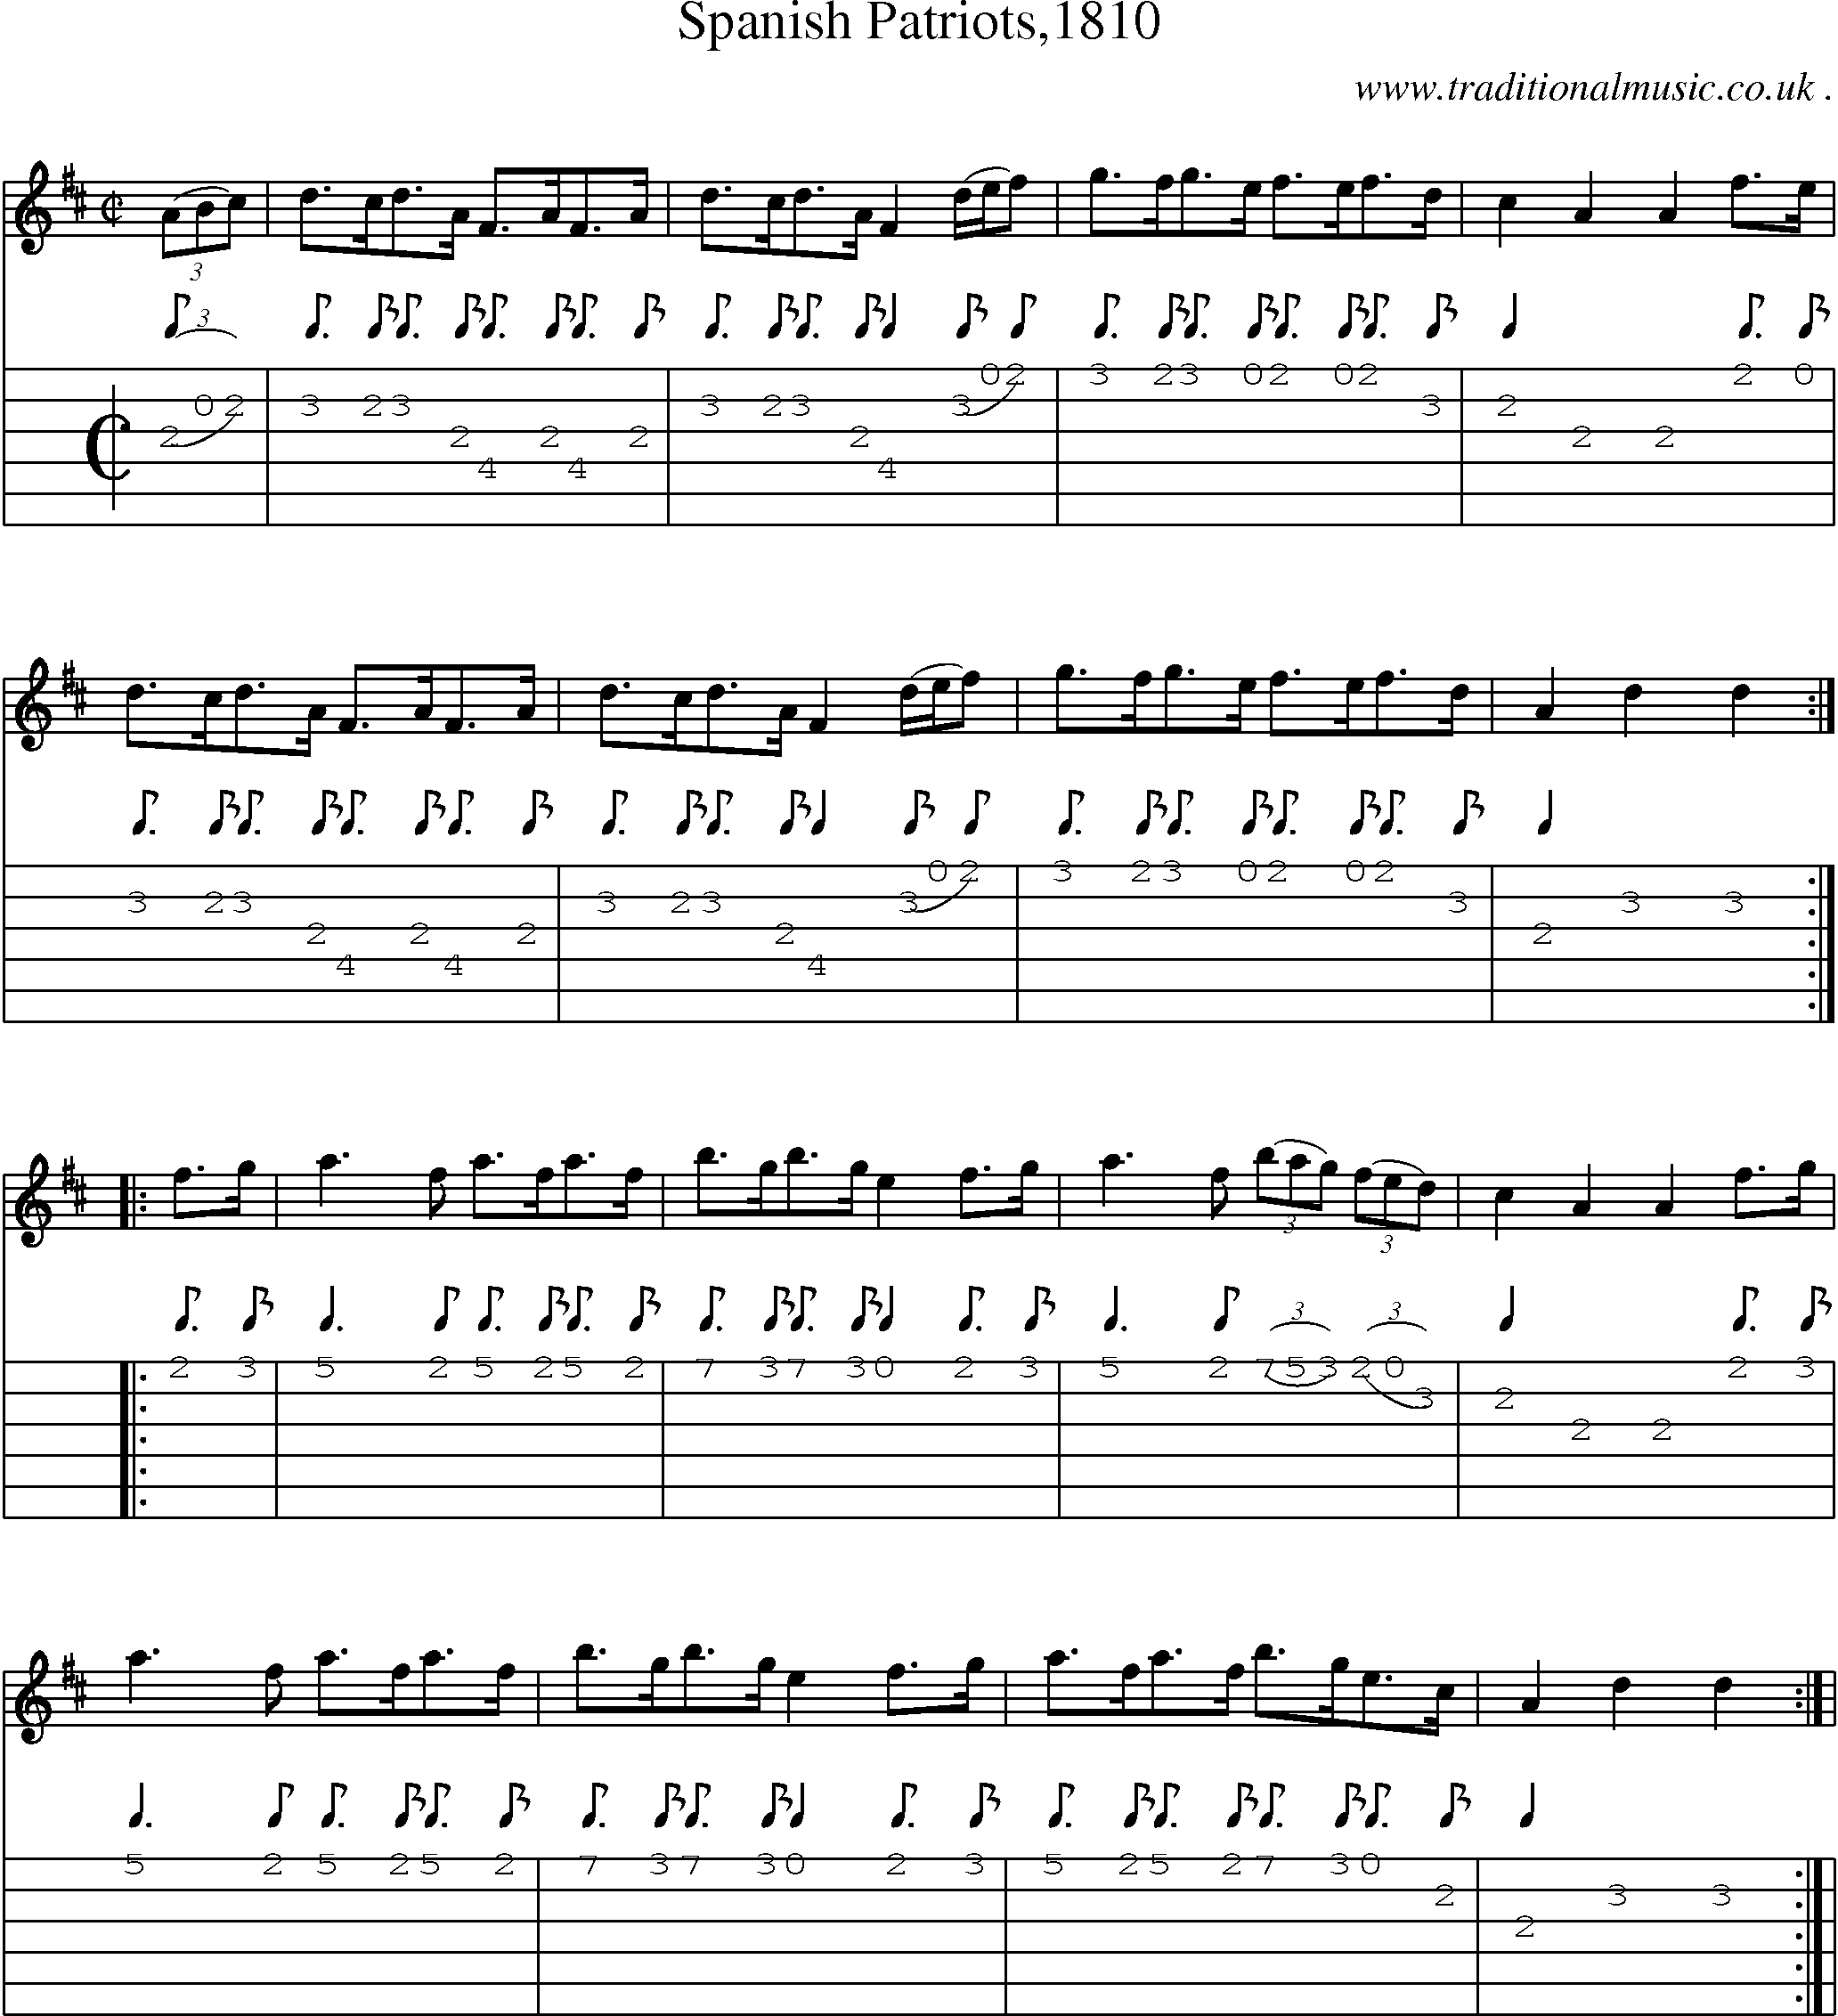 Sheet-Music and Guitar Tabs for Spanish Patriots1810